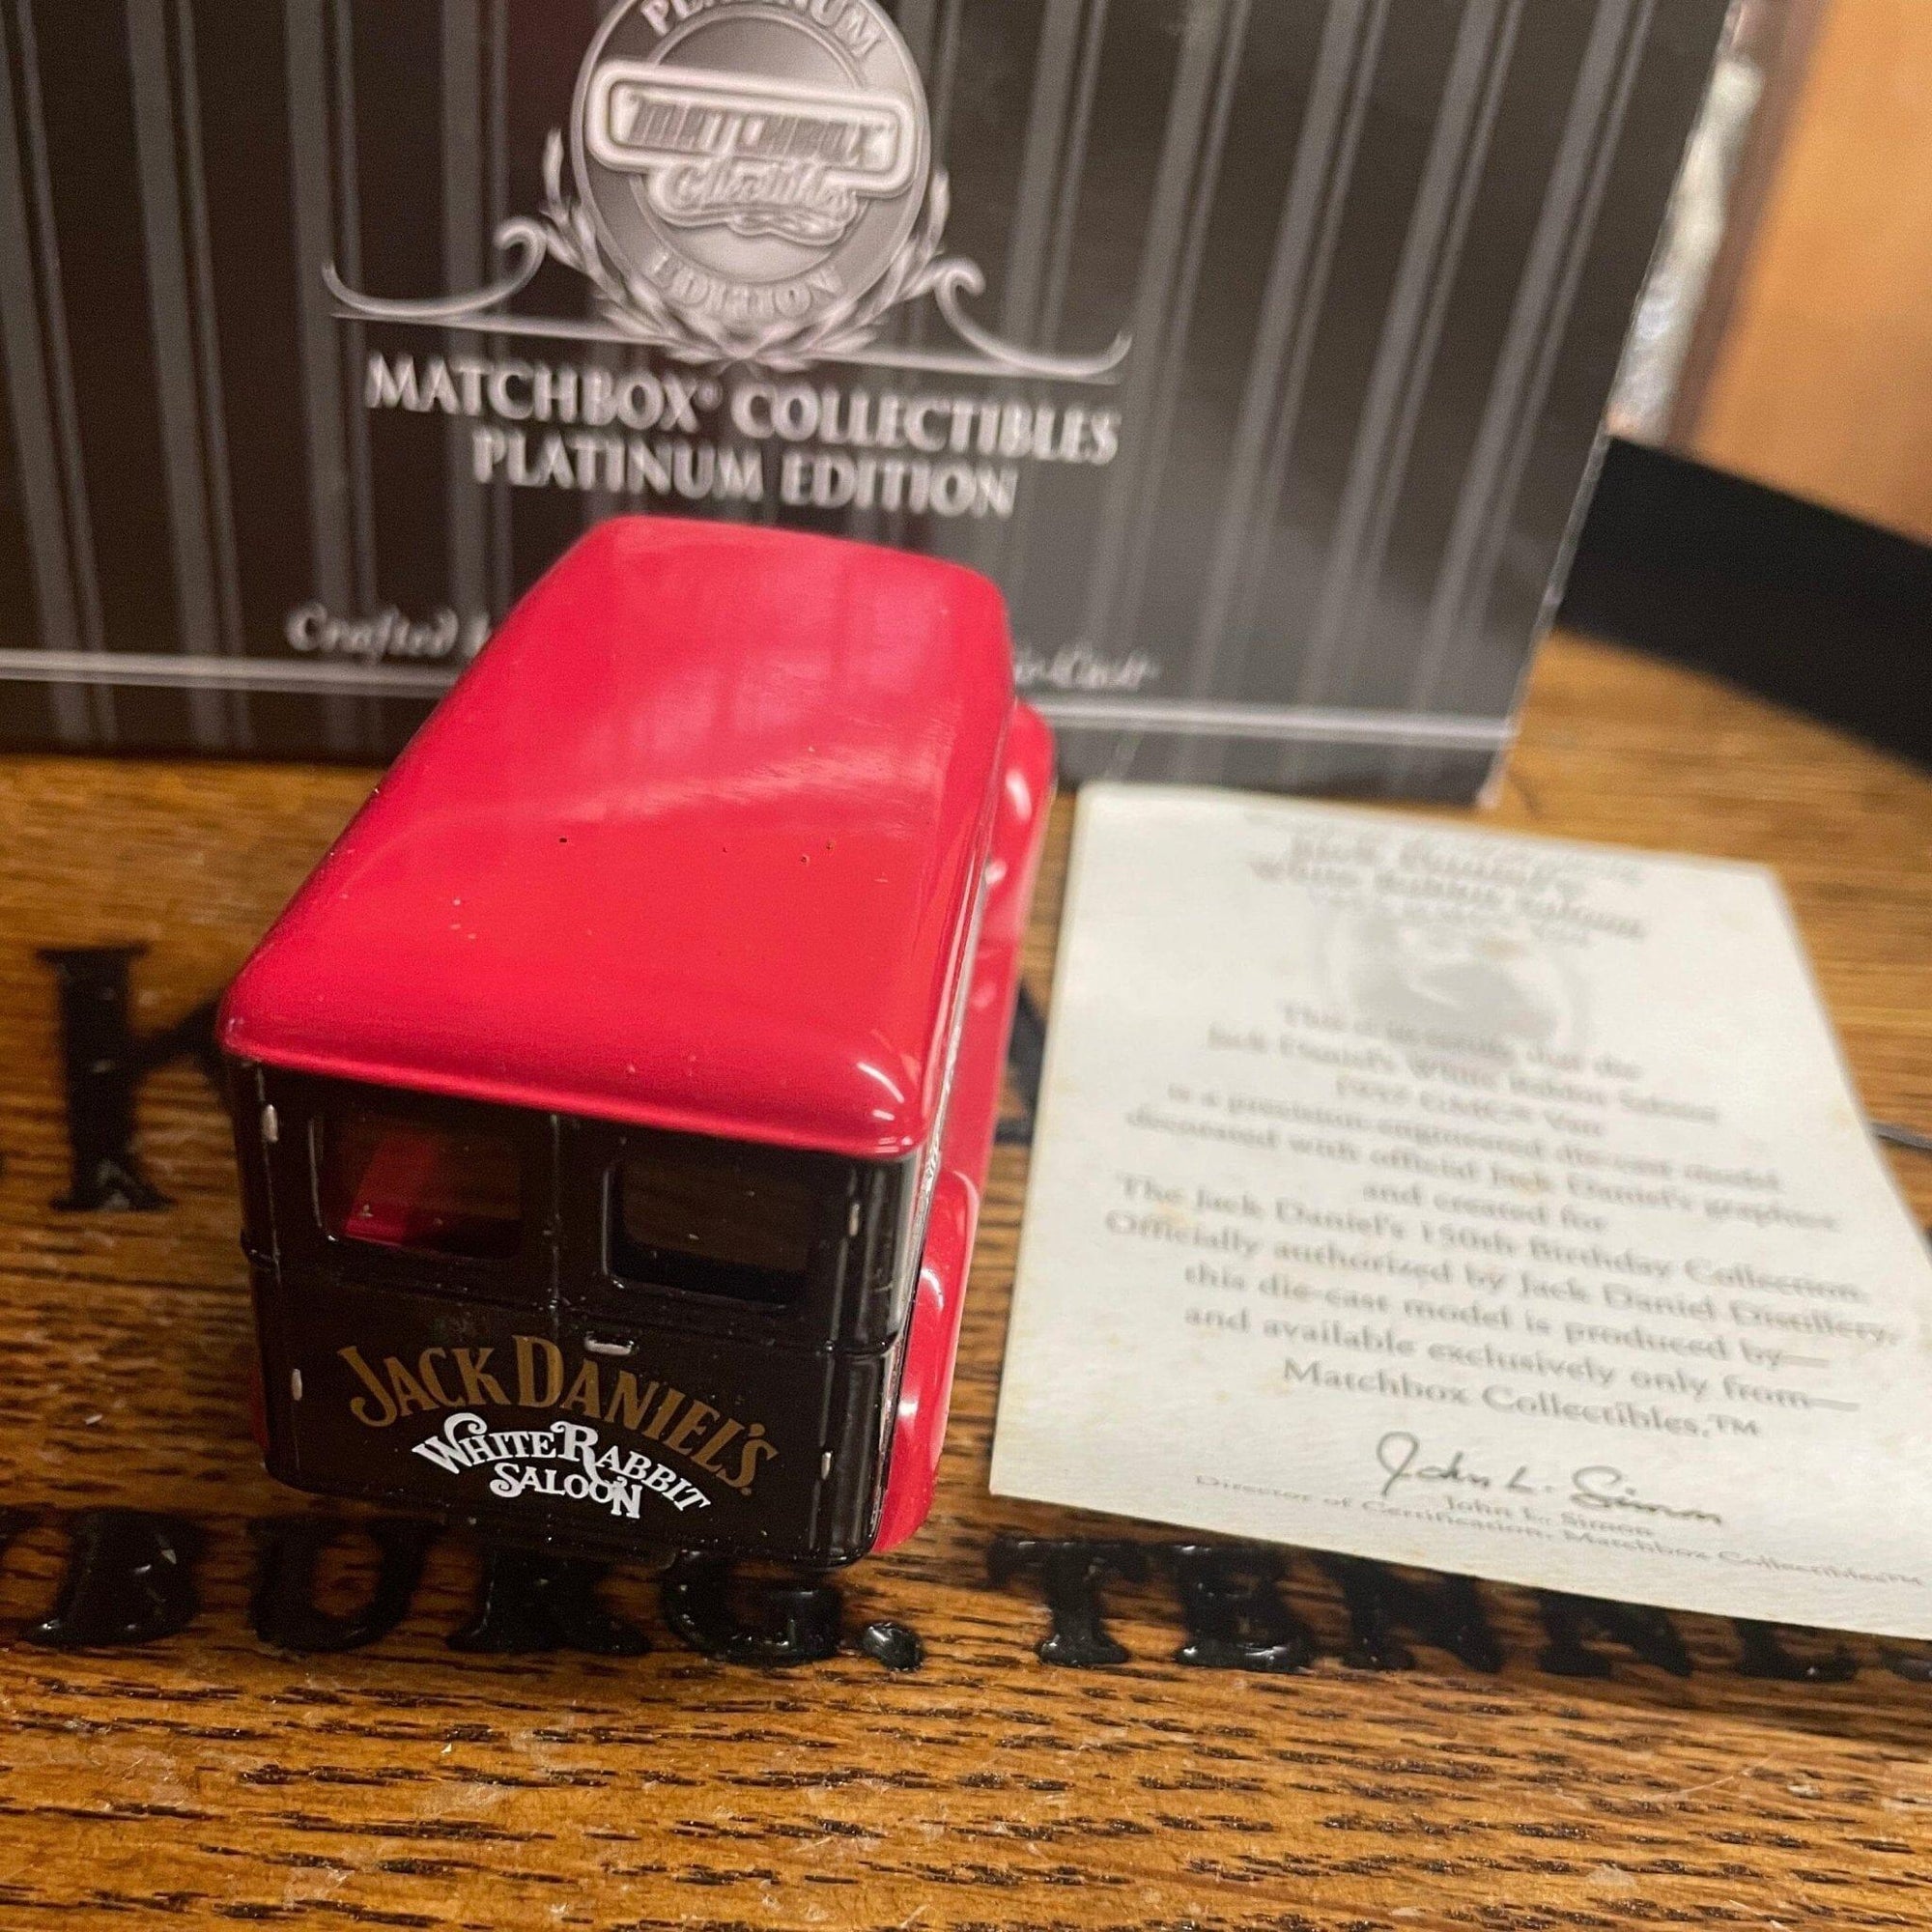 Jack Daniel’s 150th Birthday Matchbox White Rabbit Saloon Truck from 2000 - The Whiskey Cave